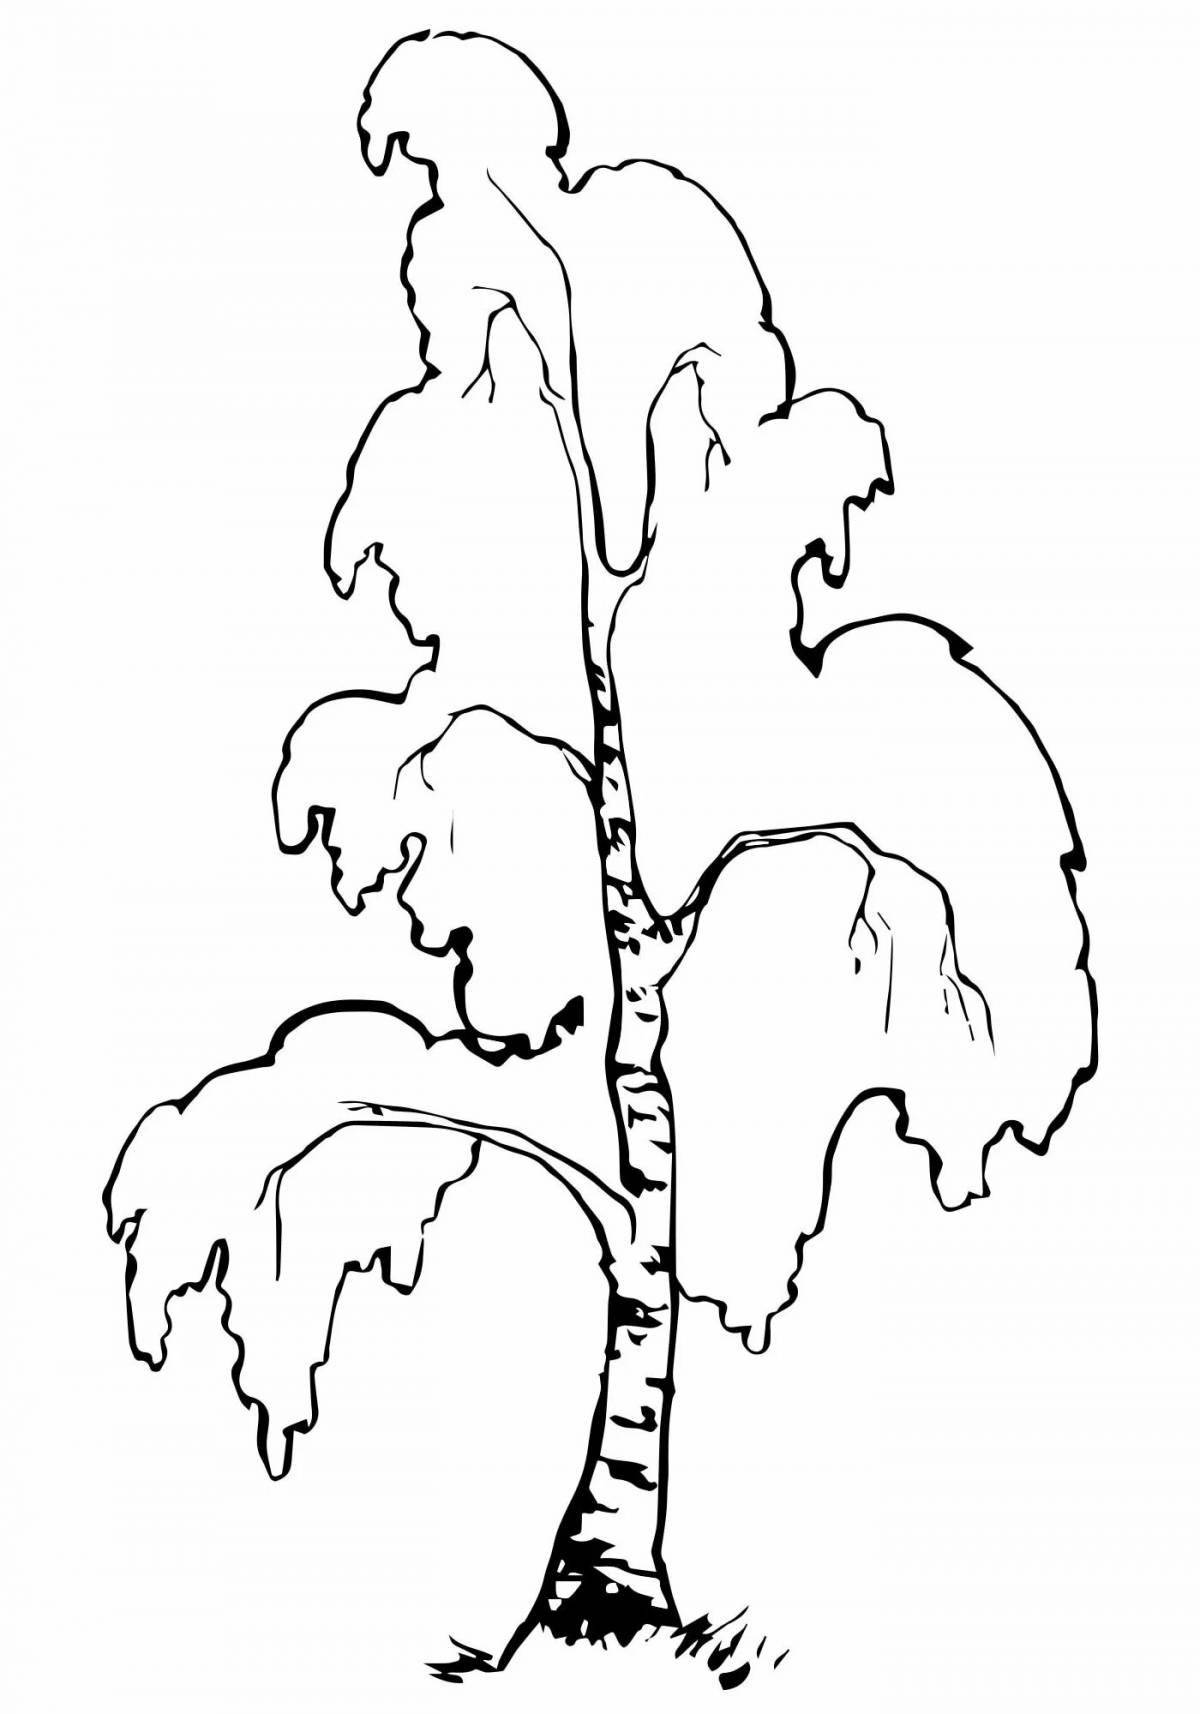 Delightful birch in the snow coloring book